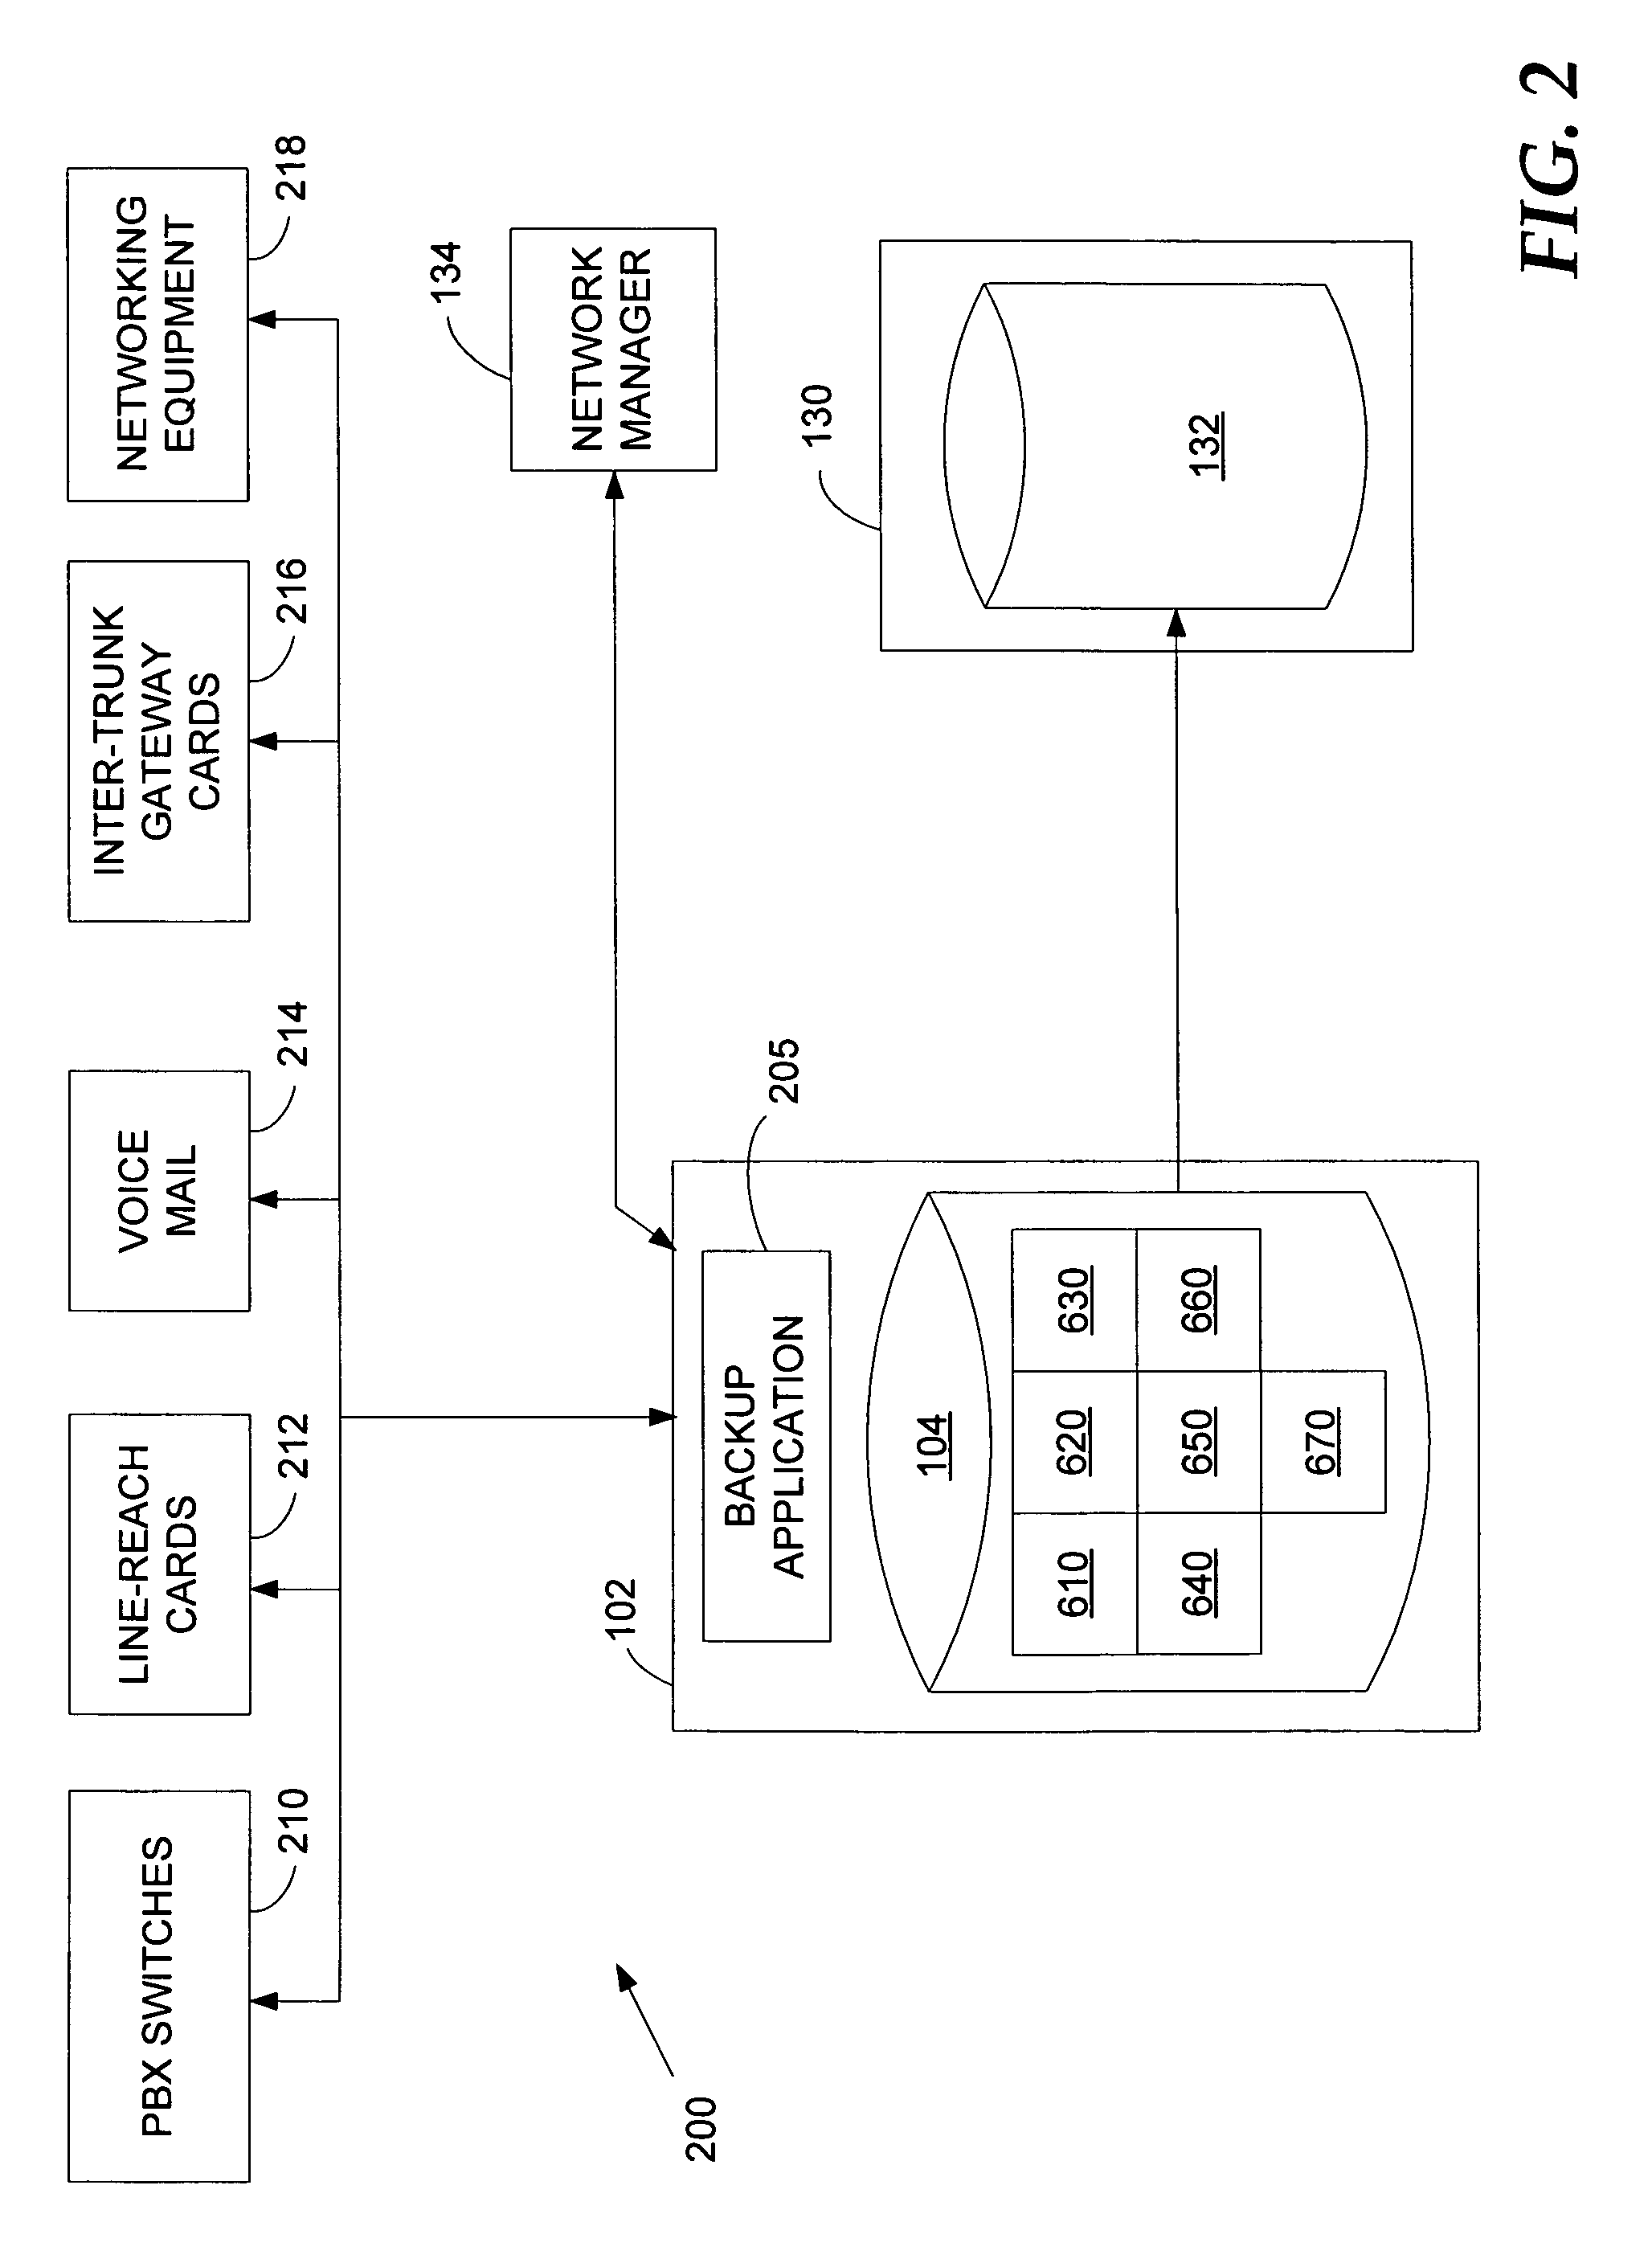 Method and system for backing up or restoring data in remote devices over a communications network